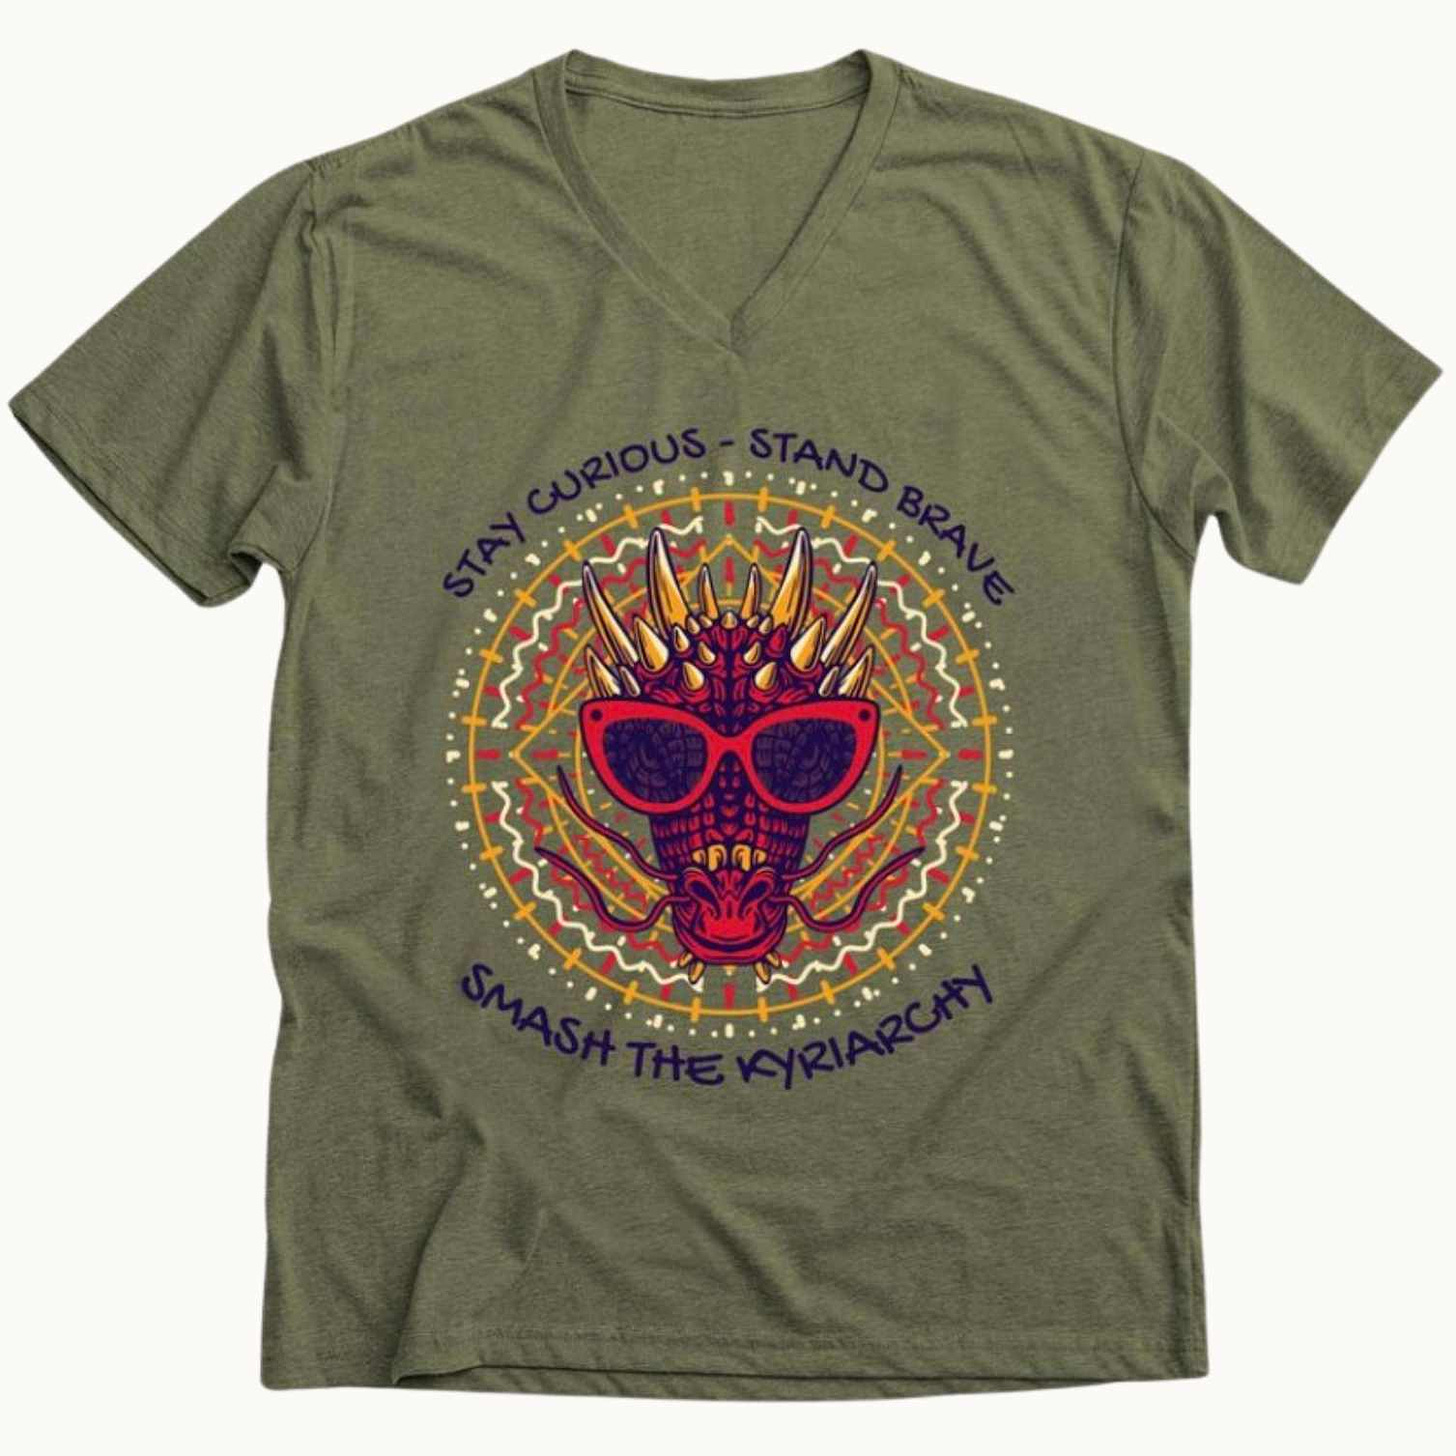 green year of the dragon t-shirt. stand brave stay curious smash the kyriarchy